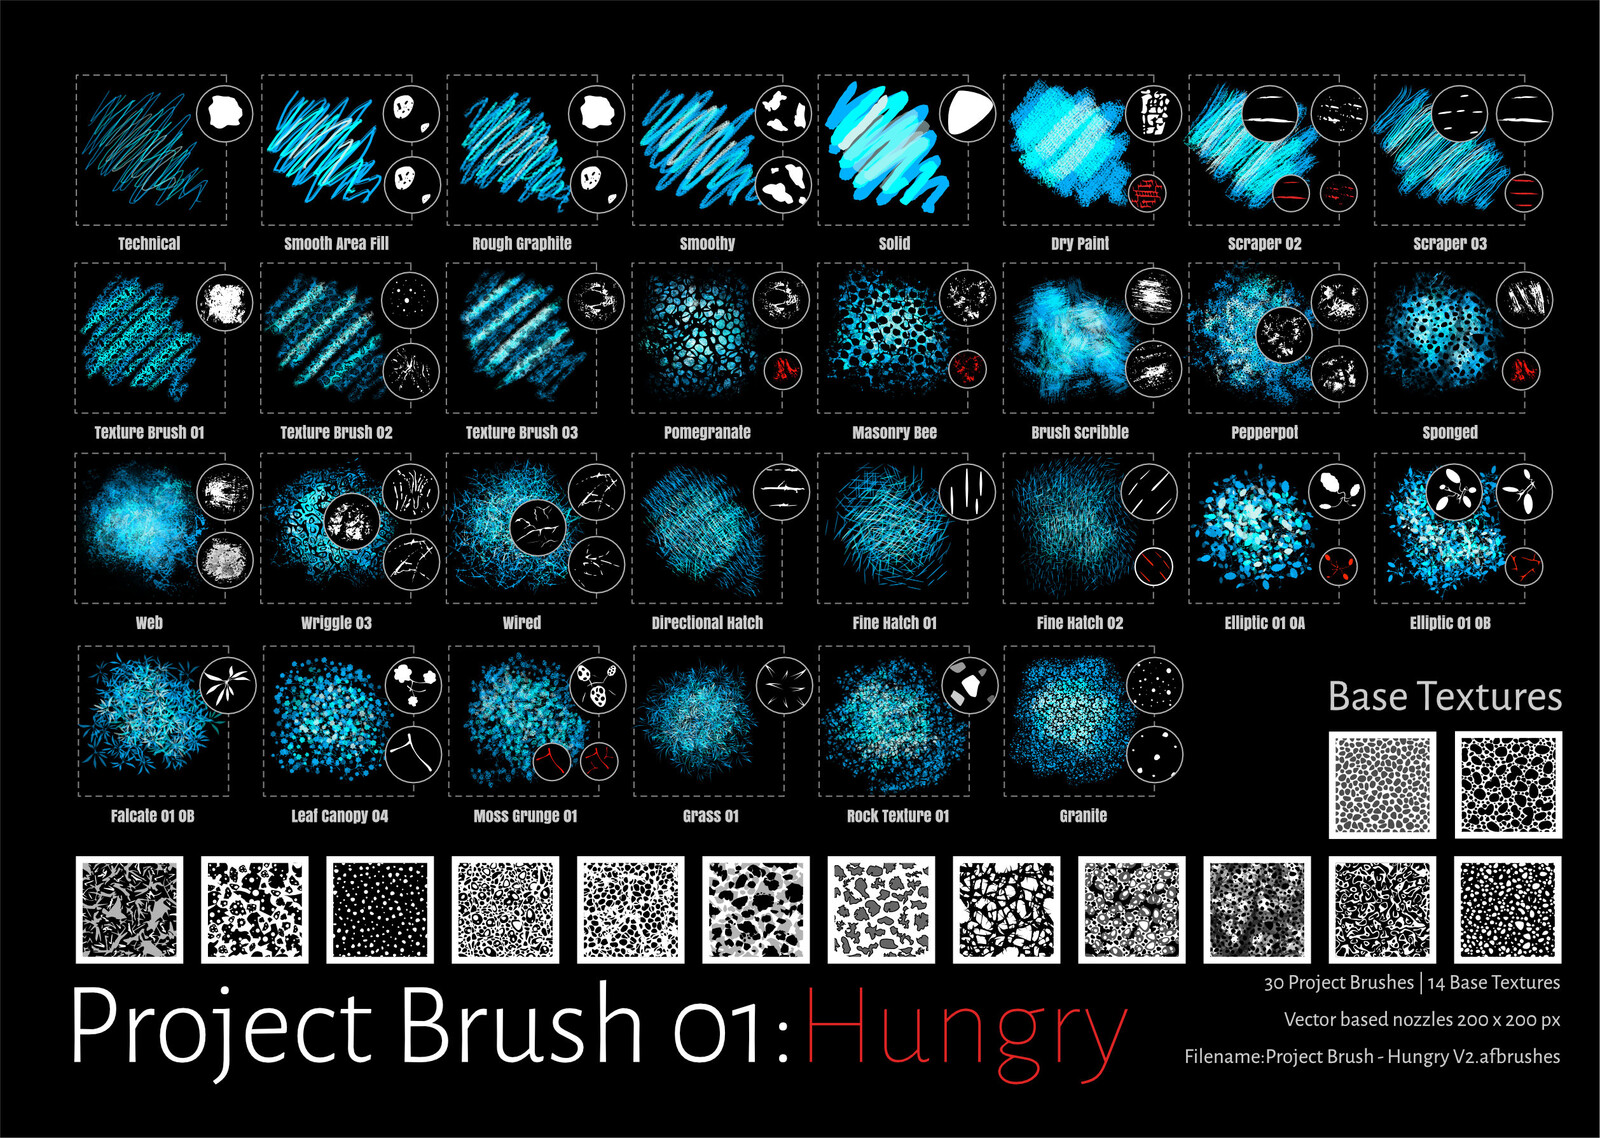 Project Brush 01: Hungry